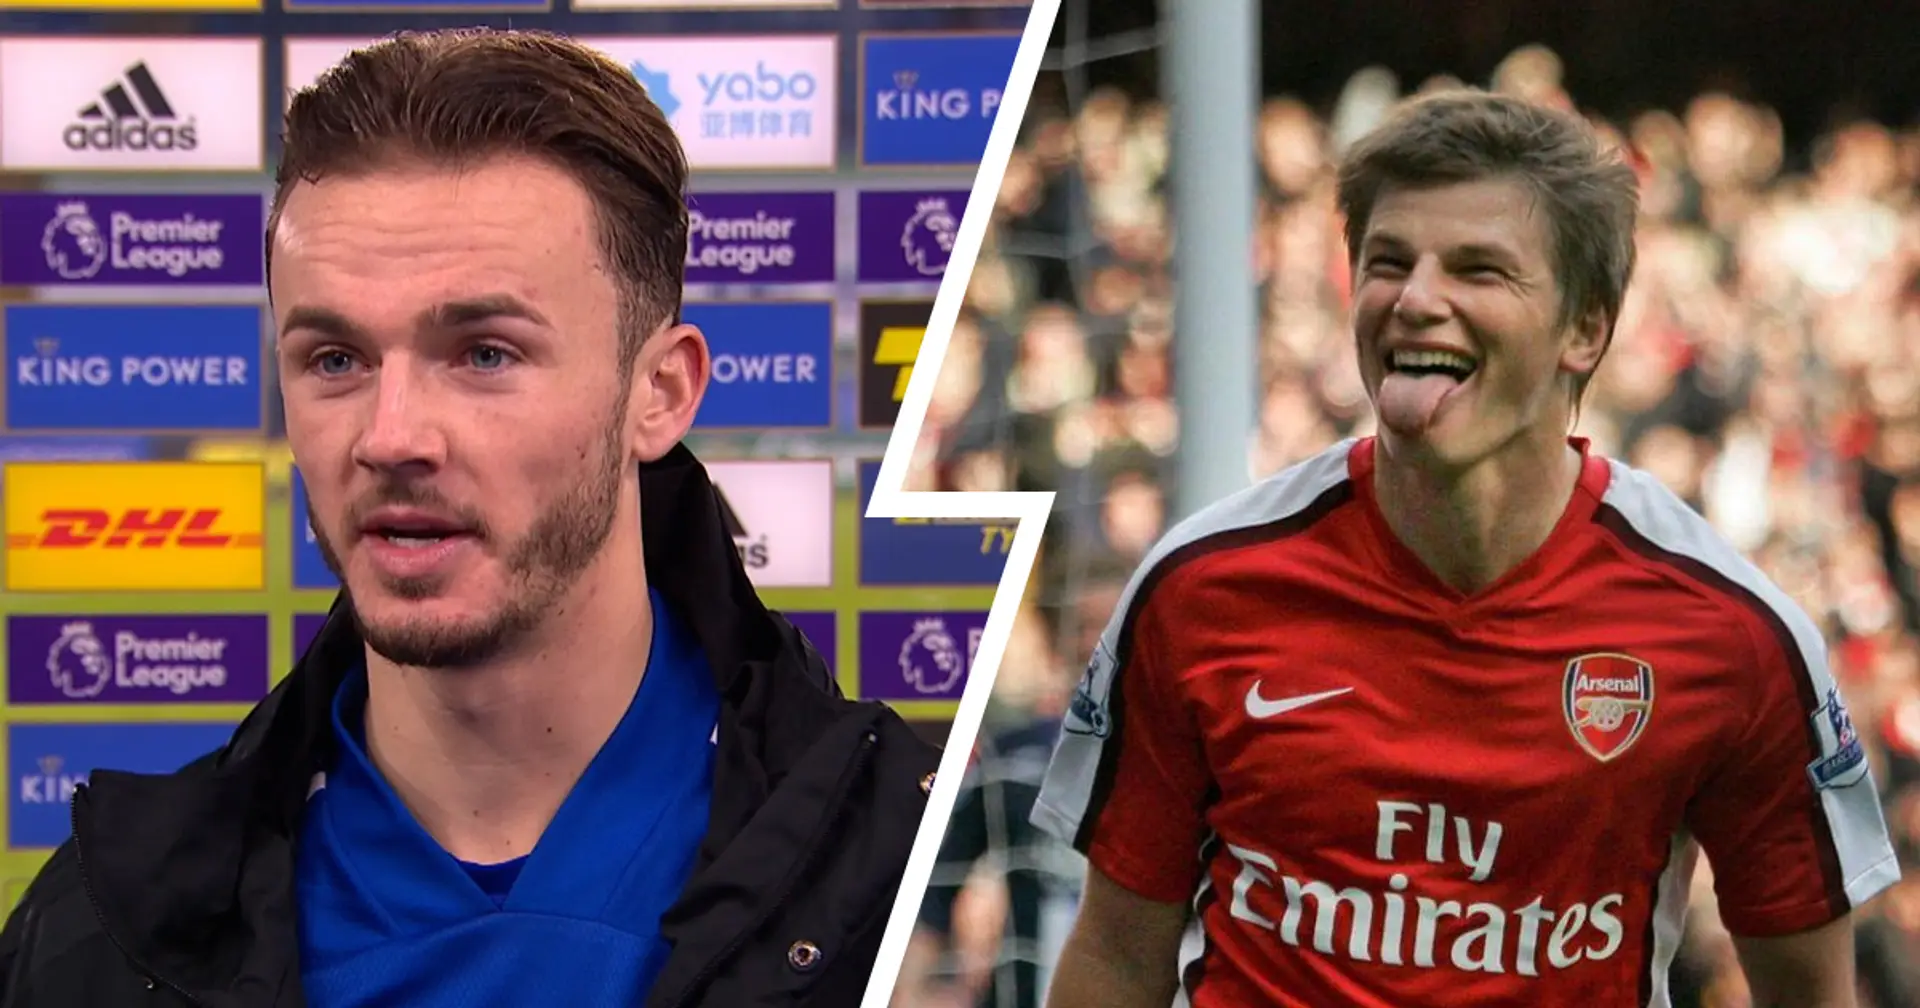 Leicester's Maddison scores vs Soton, compares it to Arshavin's debut goal for Arsenal (video)